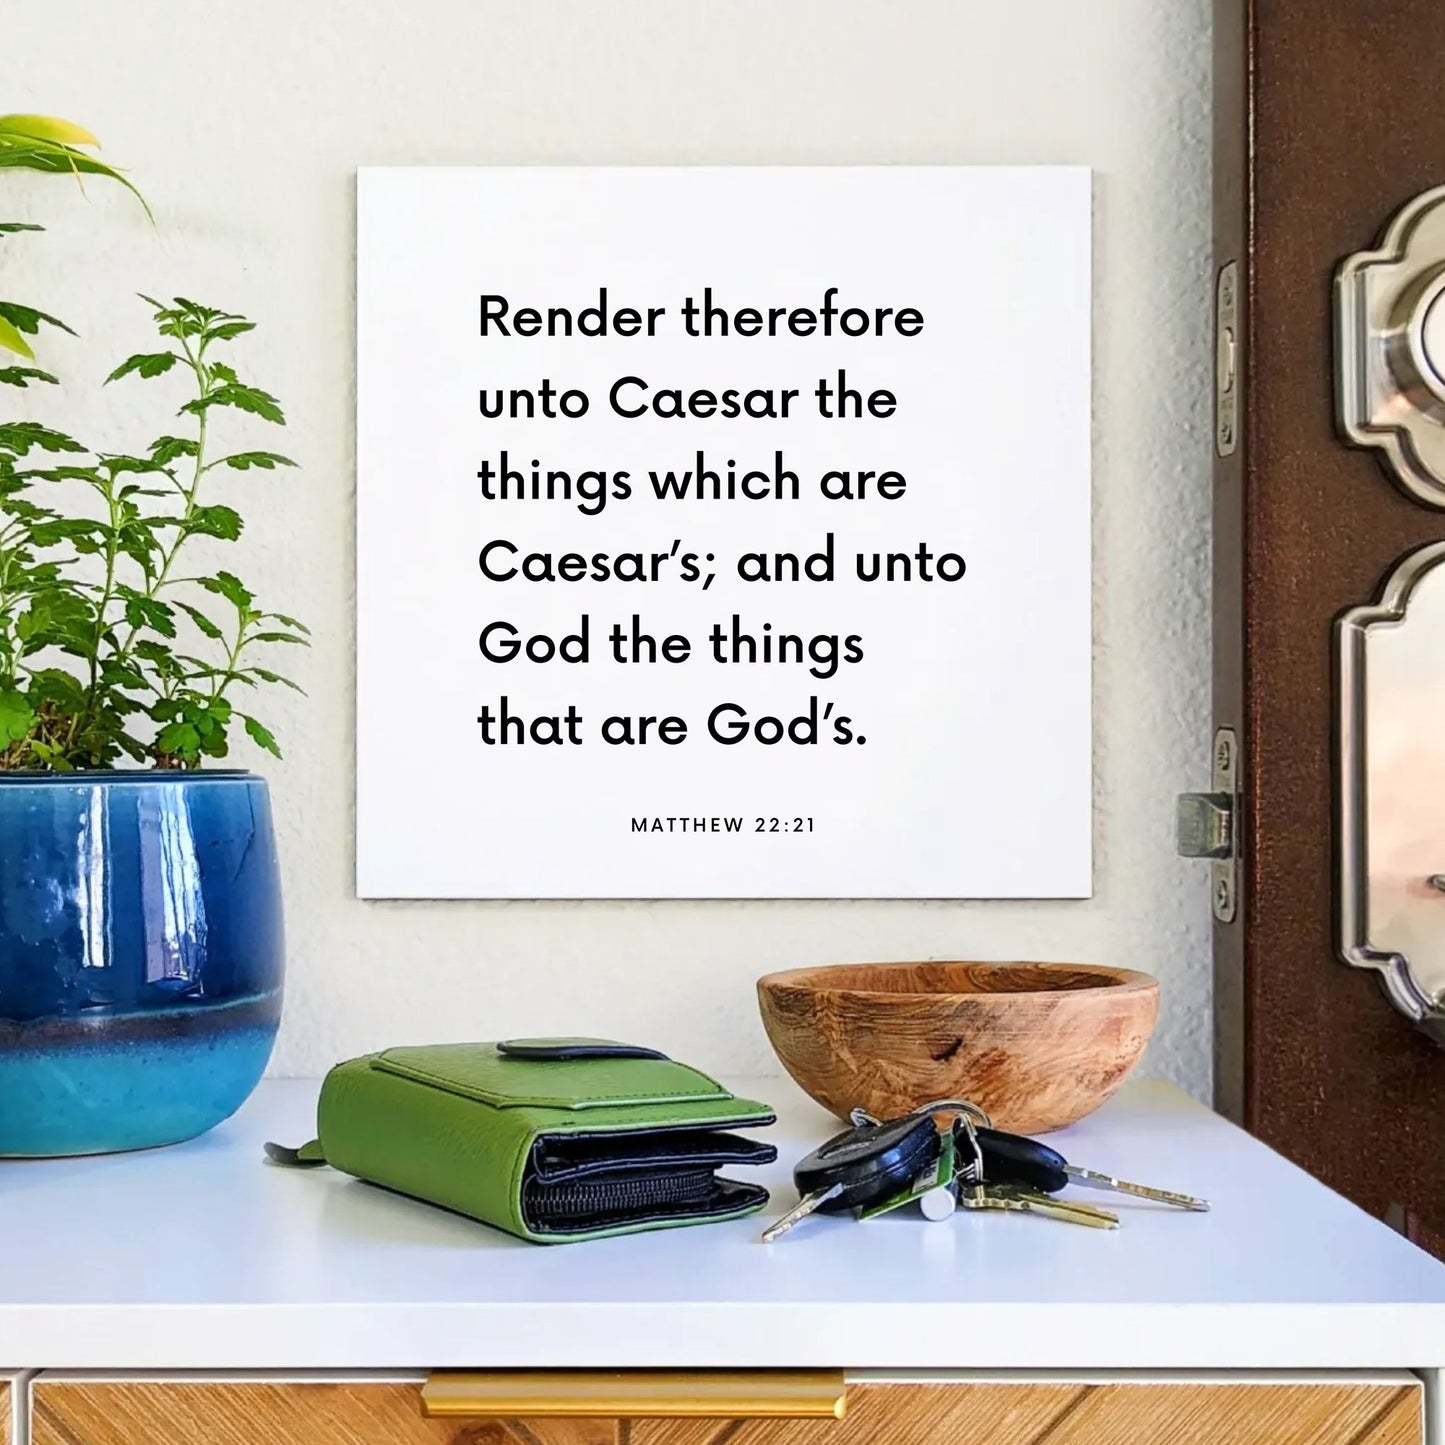 Entryway mouting of the scripture tile for Matthew 22:21 - "Render therefore unto Caesar the things which are Caesar’s"